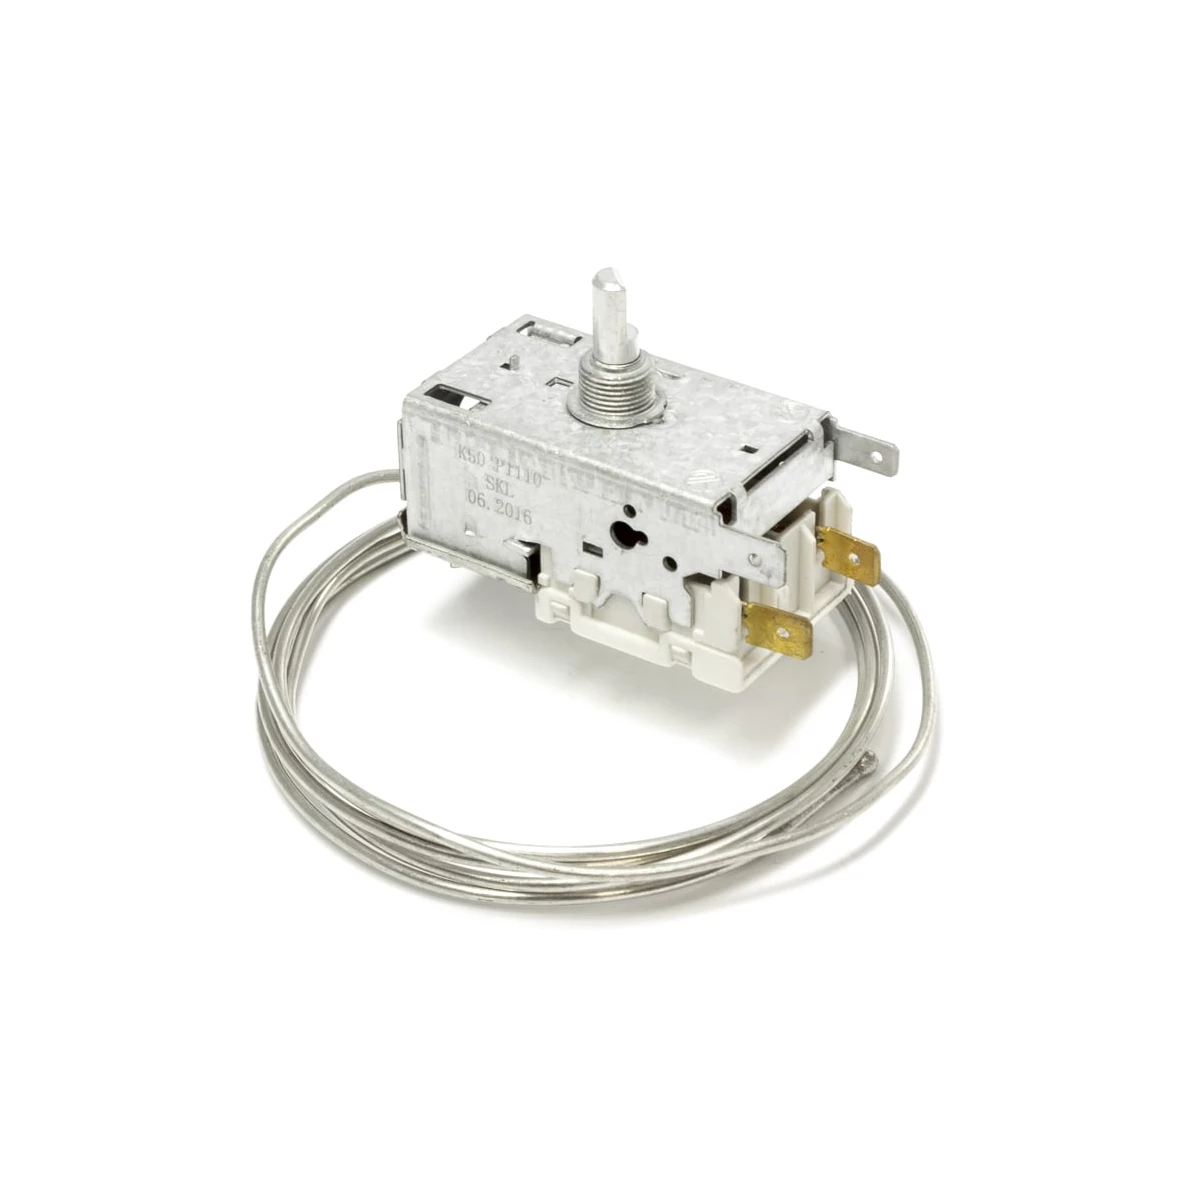 Replacement Ranco Thermostat for Propane or Gas Refrigerators